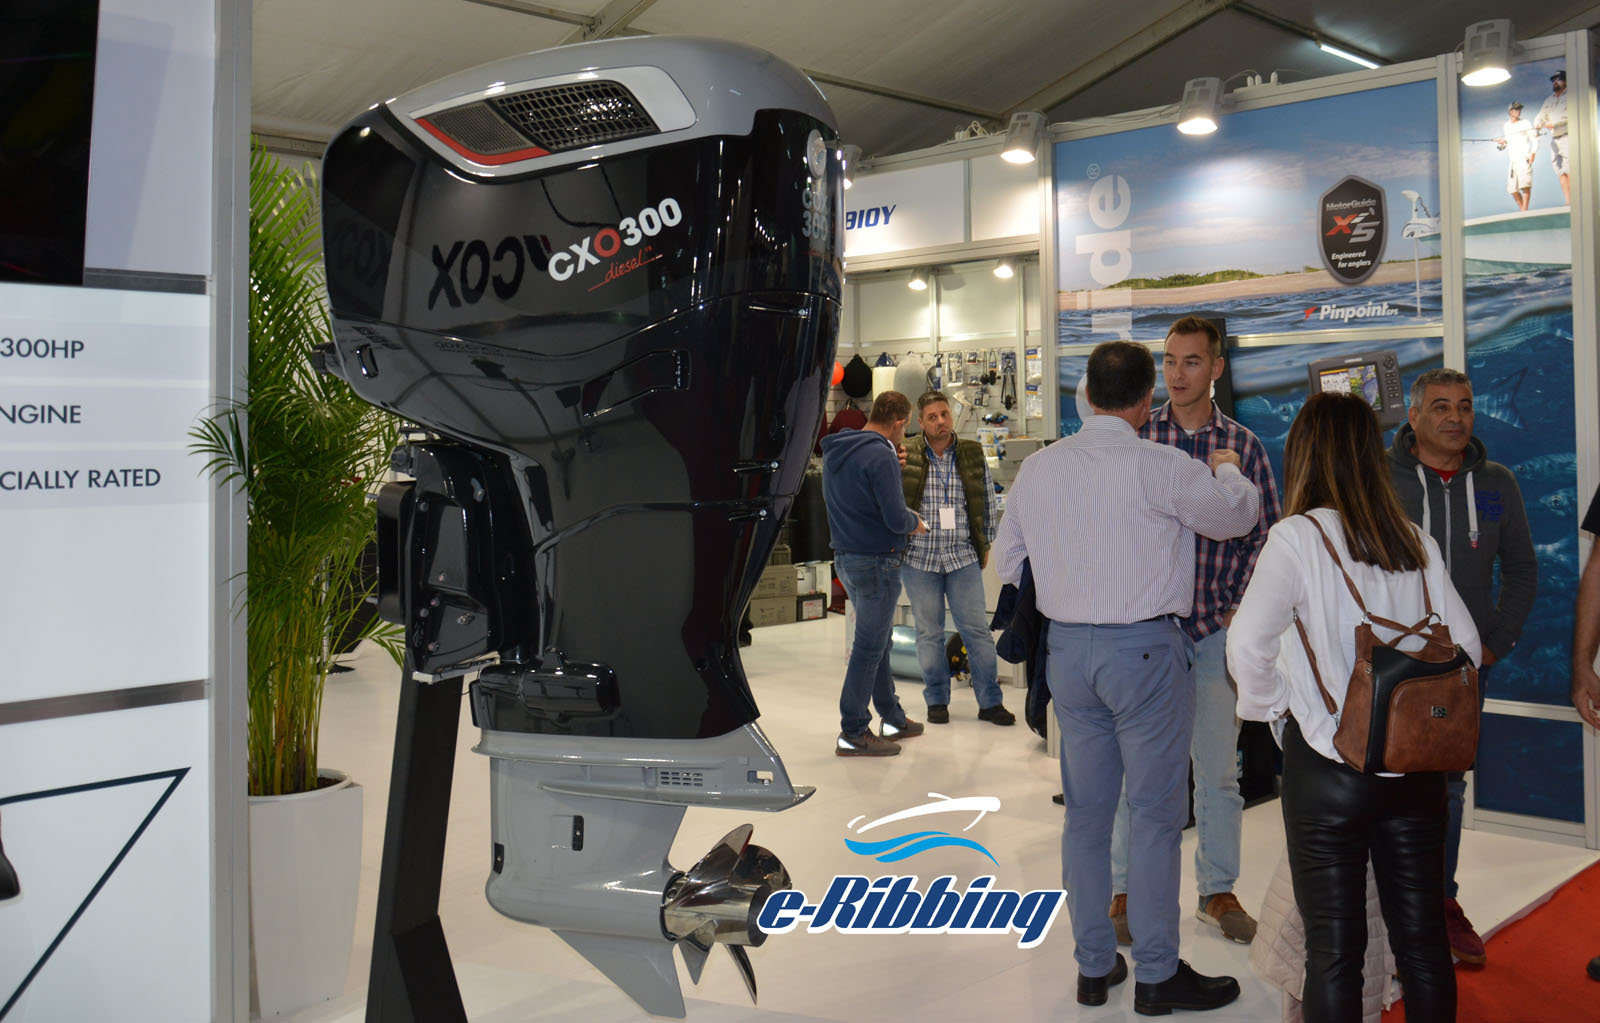 Athens Boat Show 2019